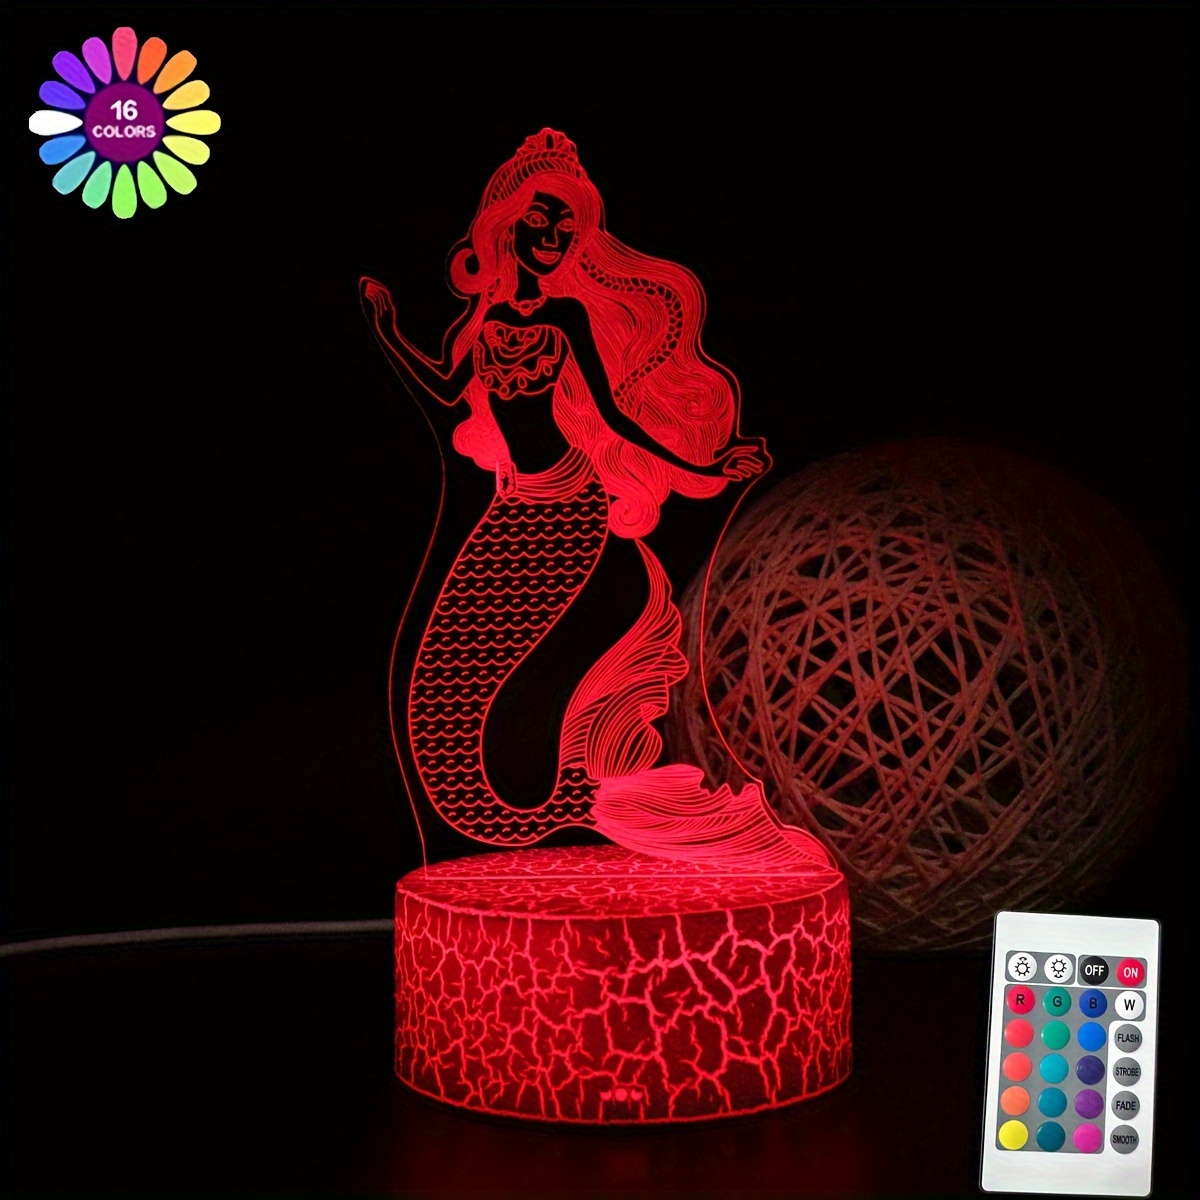 Mermaid 3d Illusion Lamp, Mermaid Gifts For Girls, 3d Night Light With 16  Colors Change Remote Control, Decorative Desk Lamp, Creative Birthday  Christ